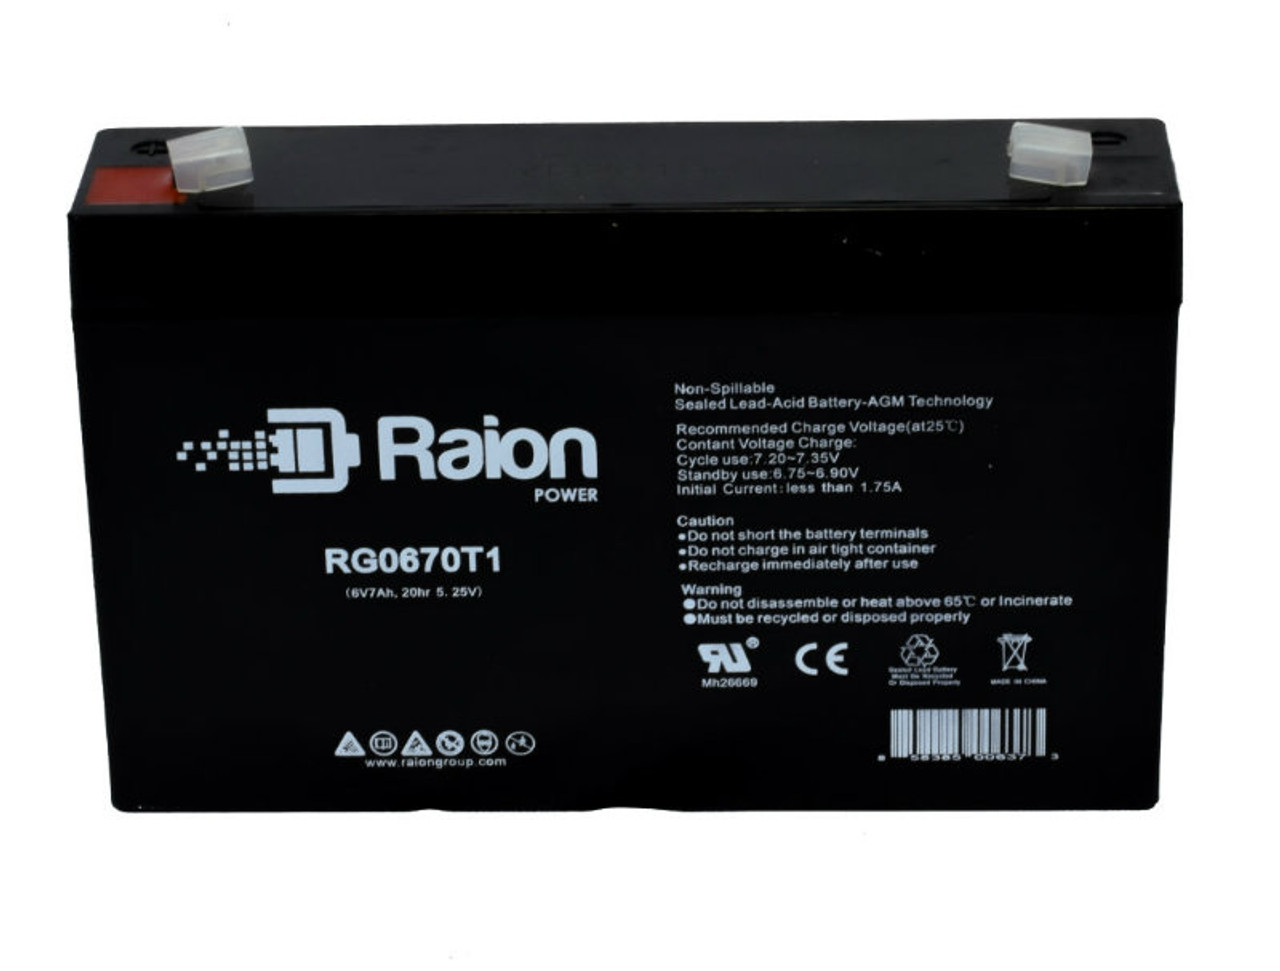 Raion Power RG0670T1 Replacement Battery Cartridge for Alaris Medical Pc1 Gemini Infusion Pump/Controller